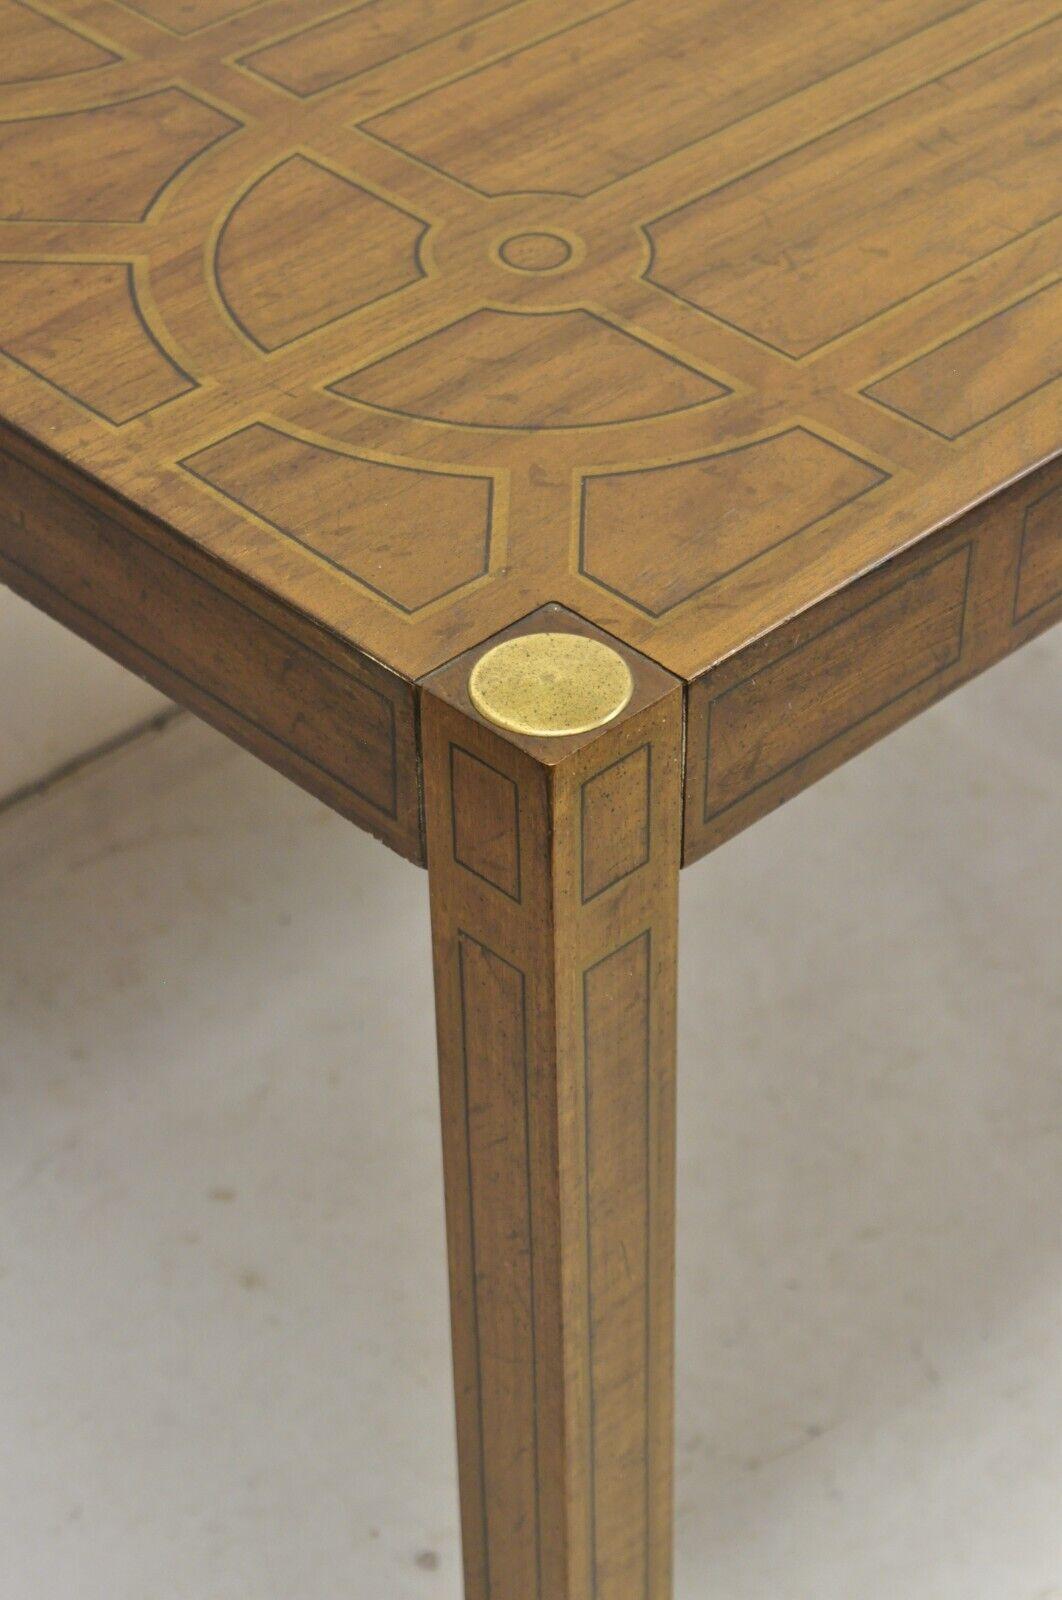 Drexel Oxford Square Geometric Painted Parsons Style Console Desk Dining Table. Circa Mid 20th Century. Measurements: 29